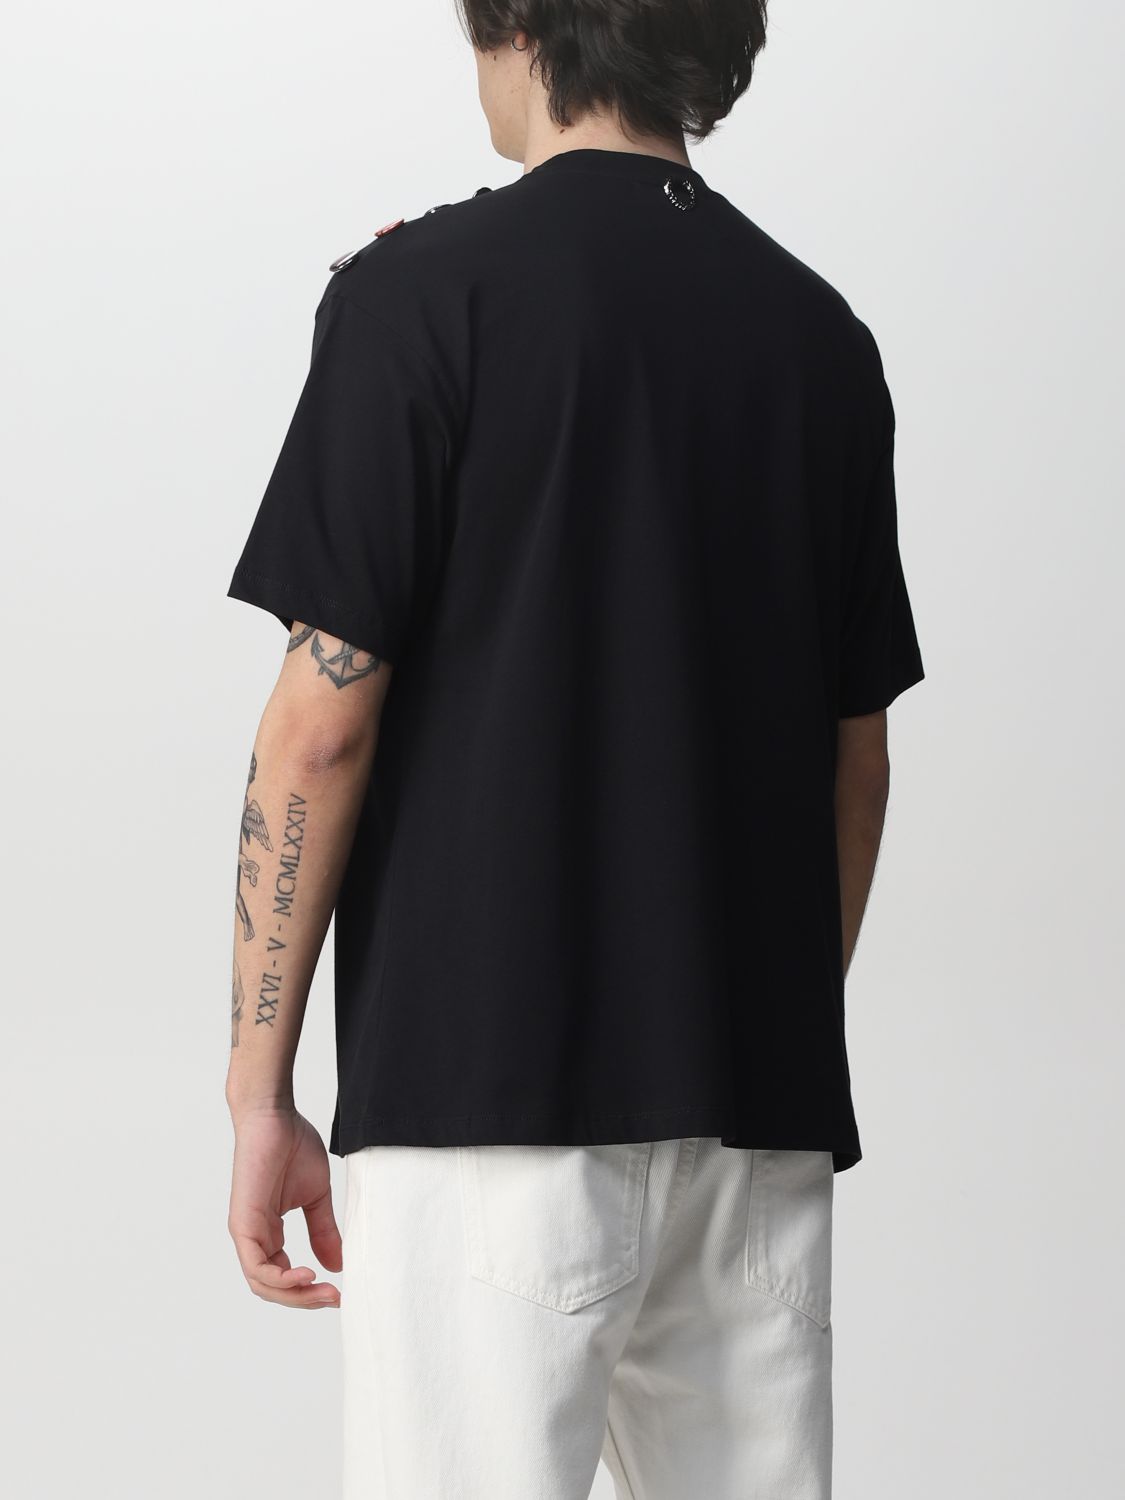 T-shirt Fred Perry By Raf Simons: Fred Perry By Raf Simons t-shirt for man black 2